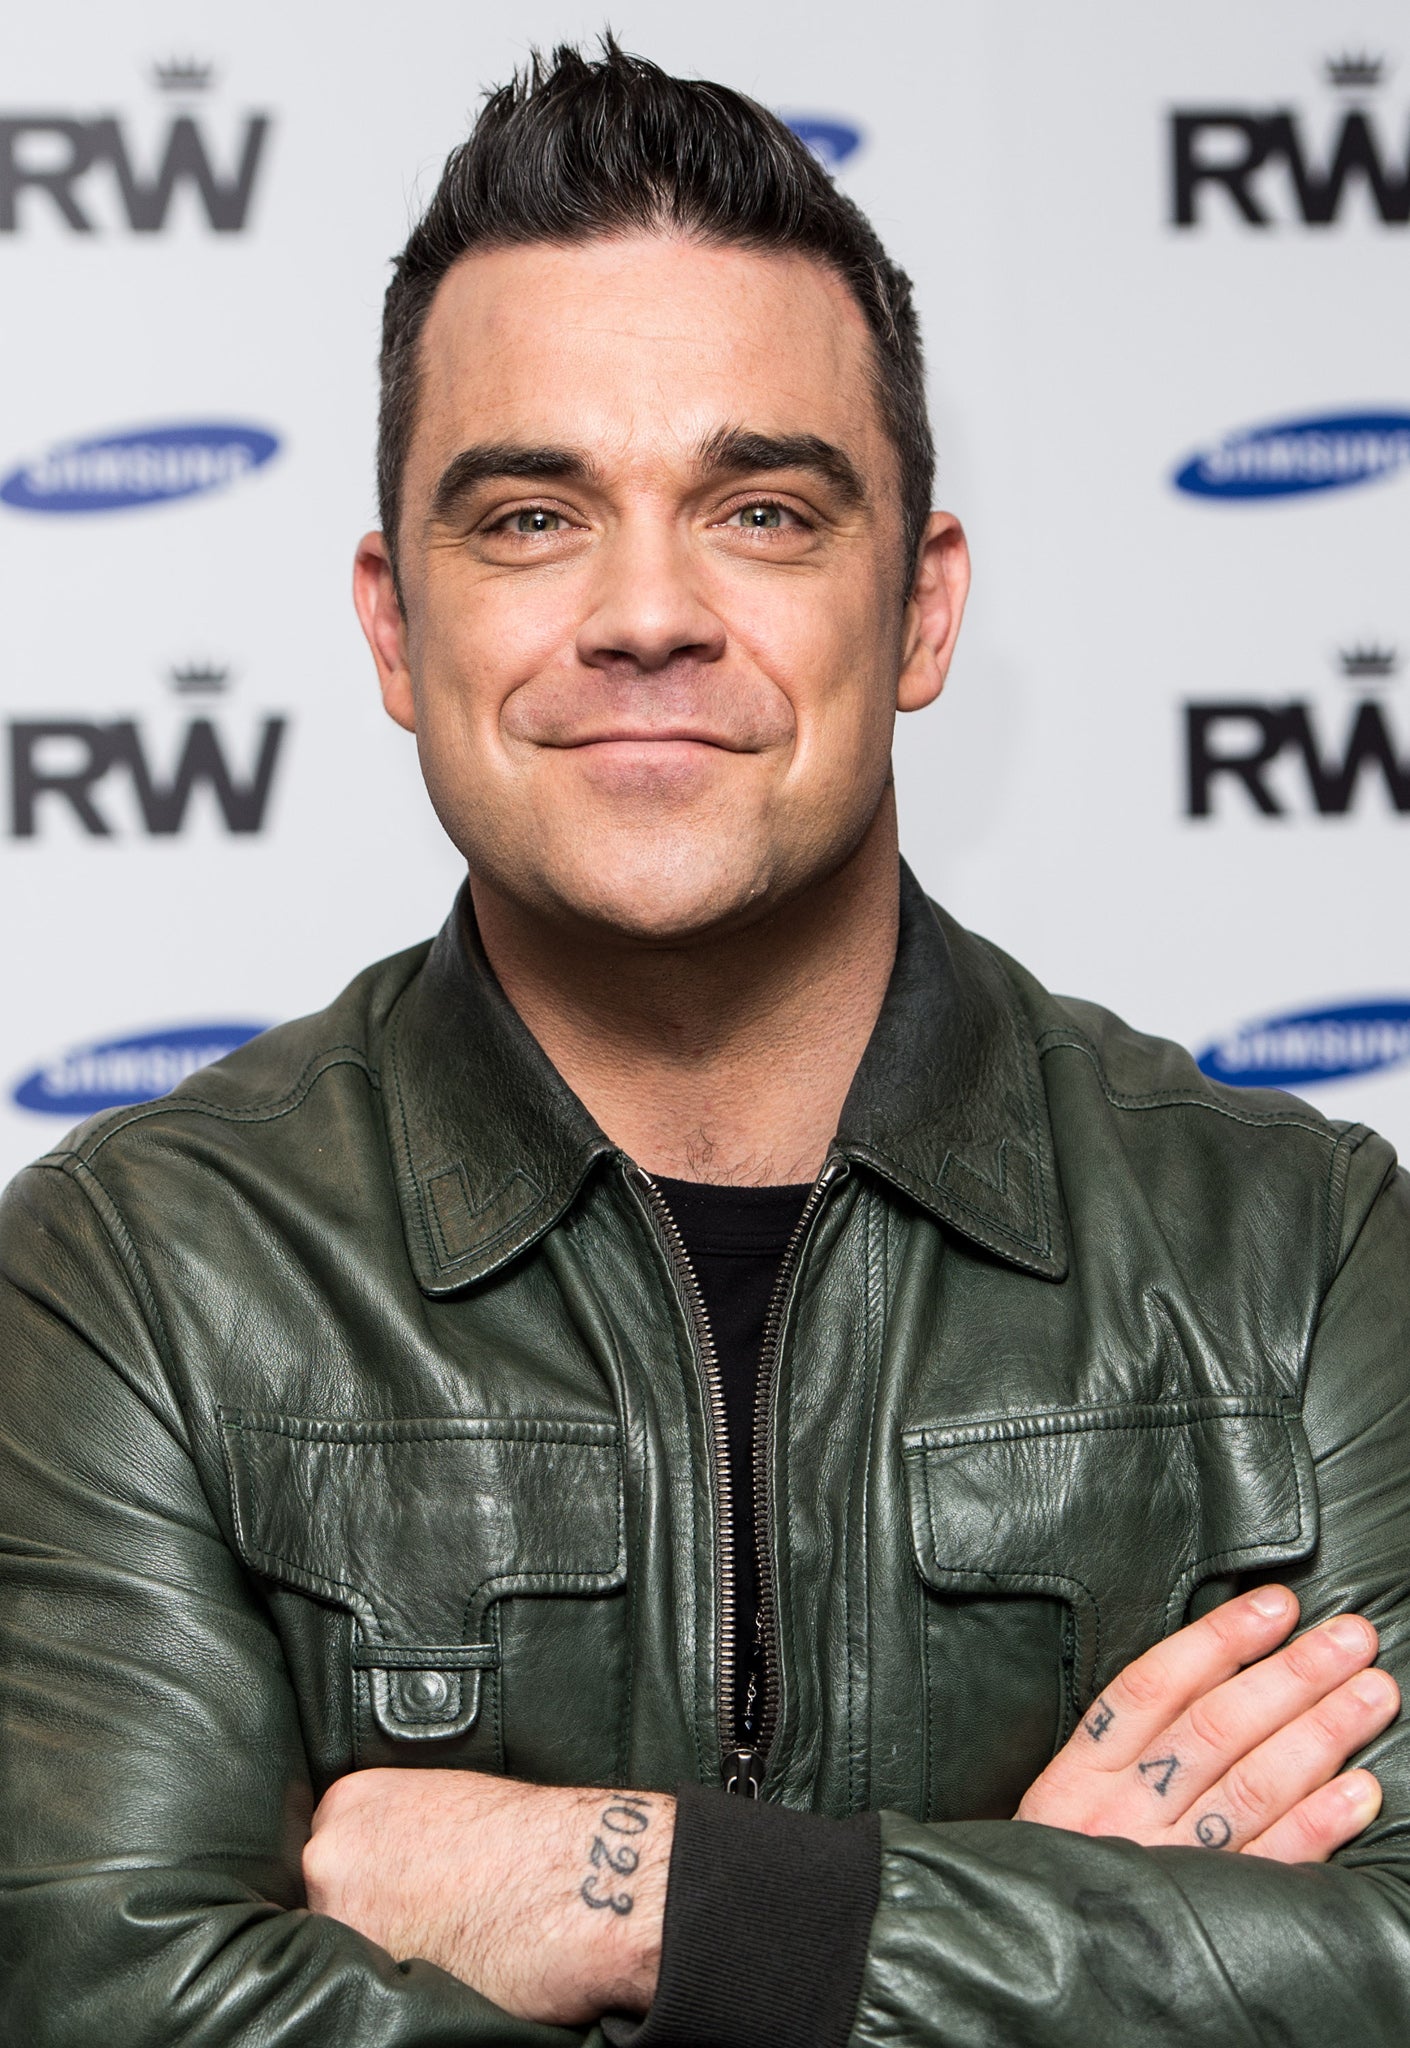 Robbie Williams says his daughter threw up after he sang the song he wrote for her